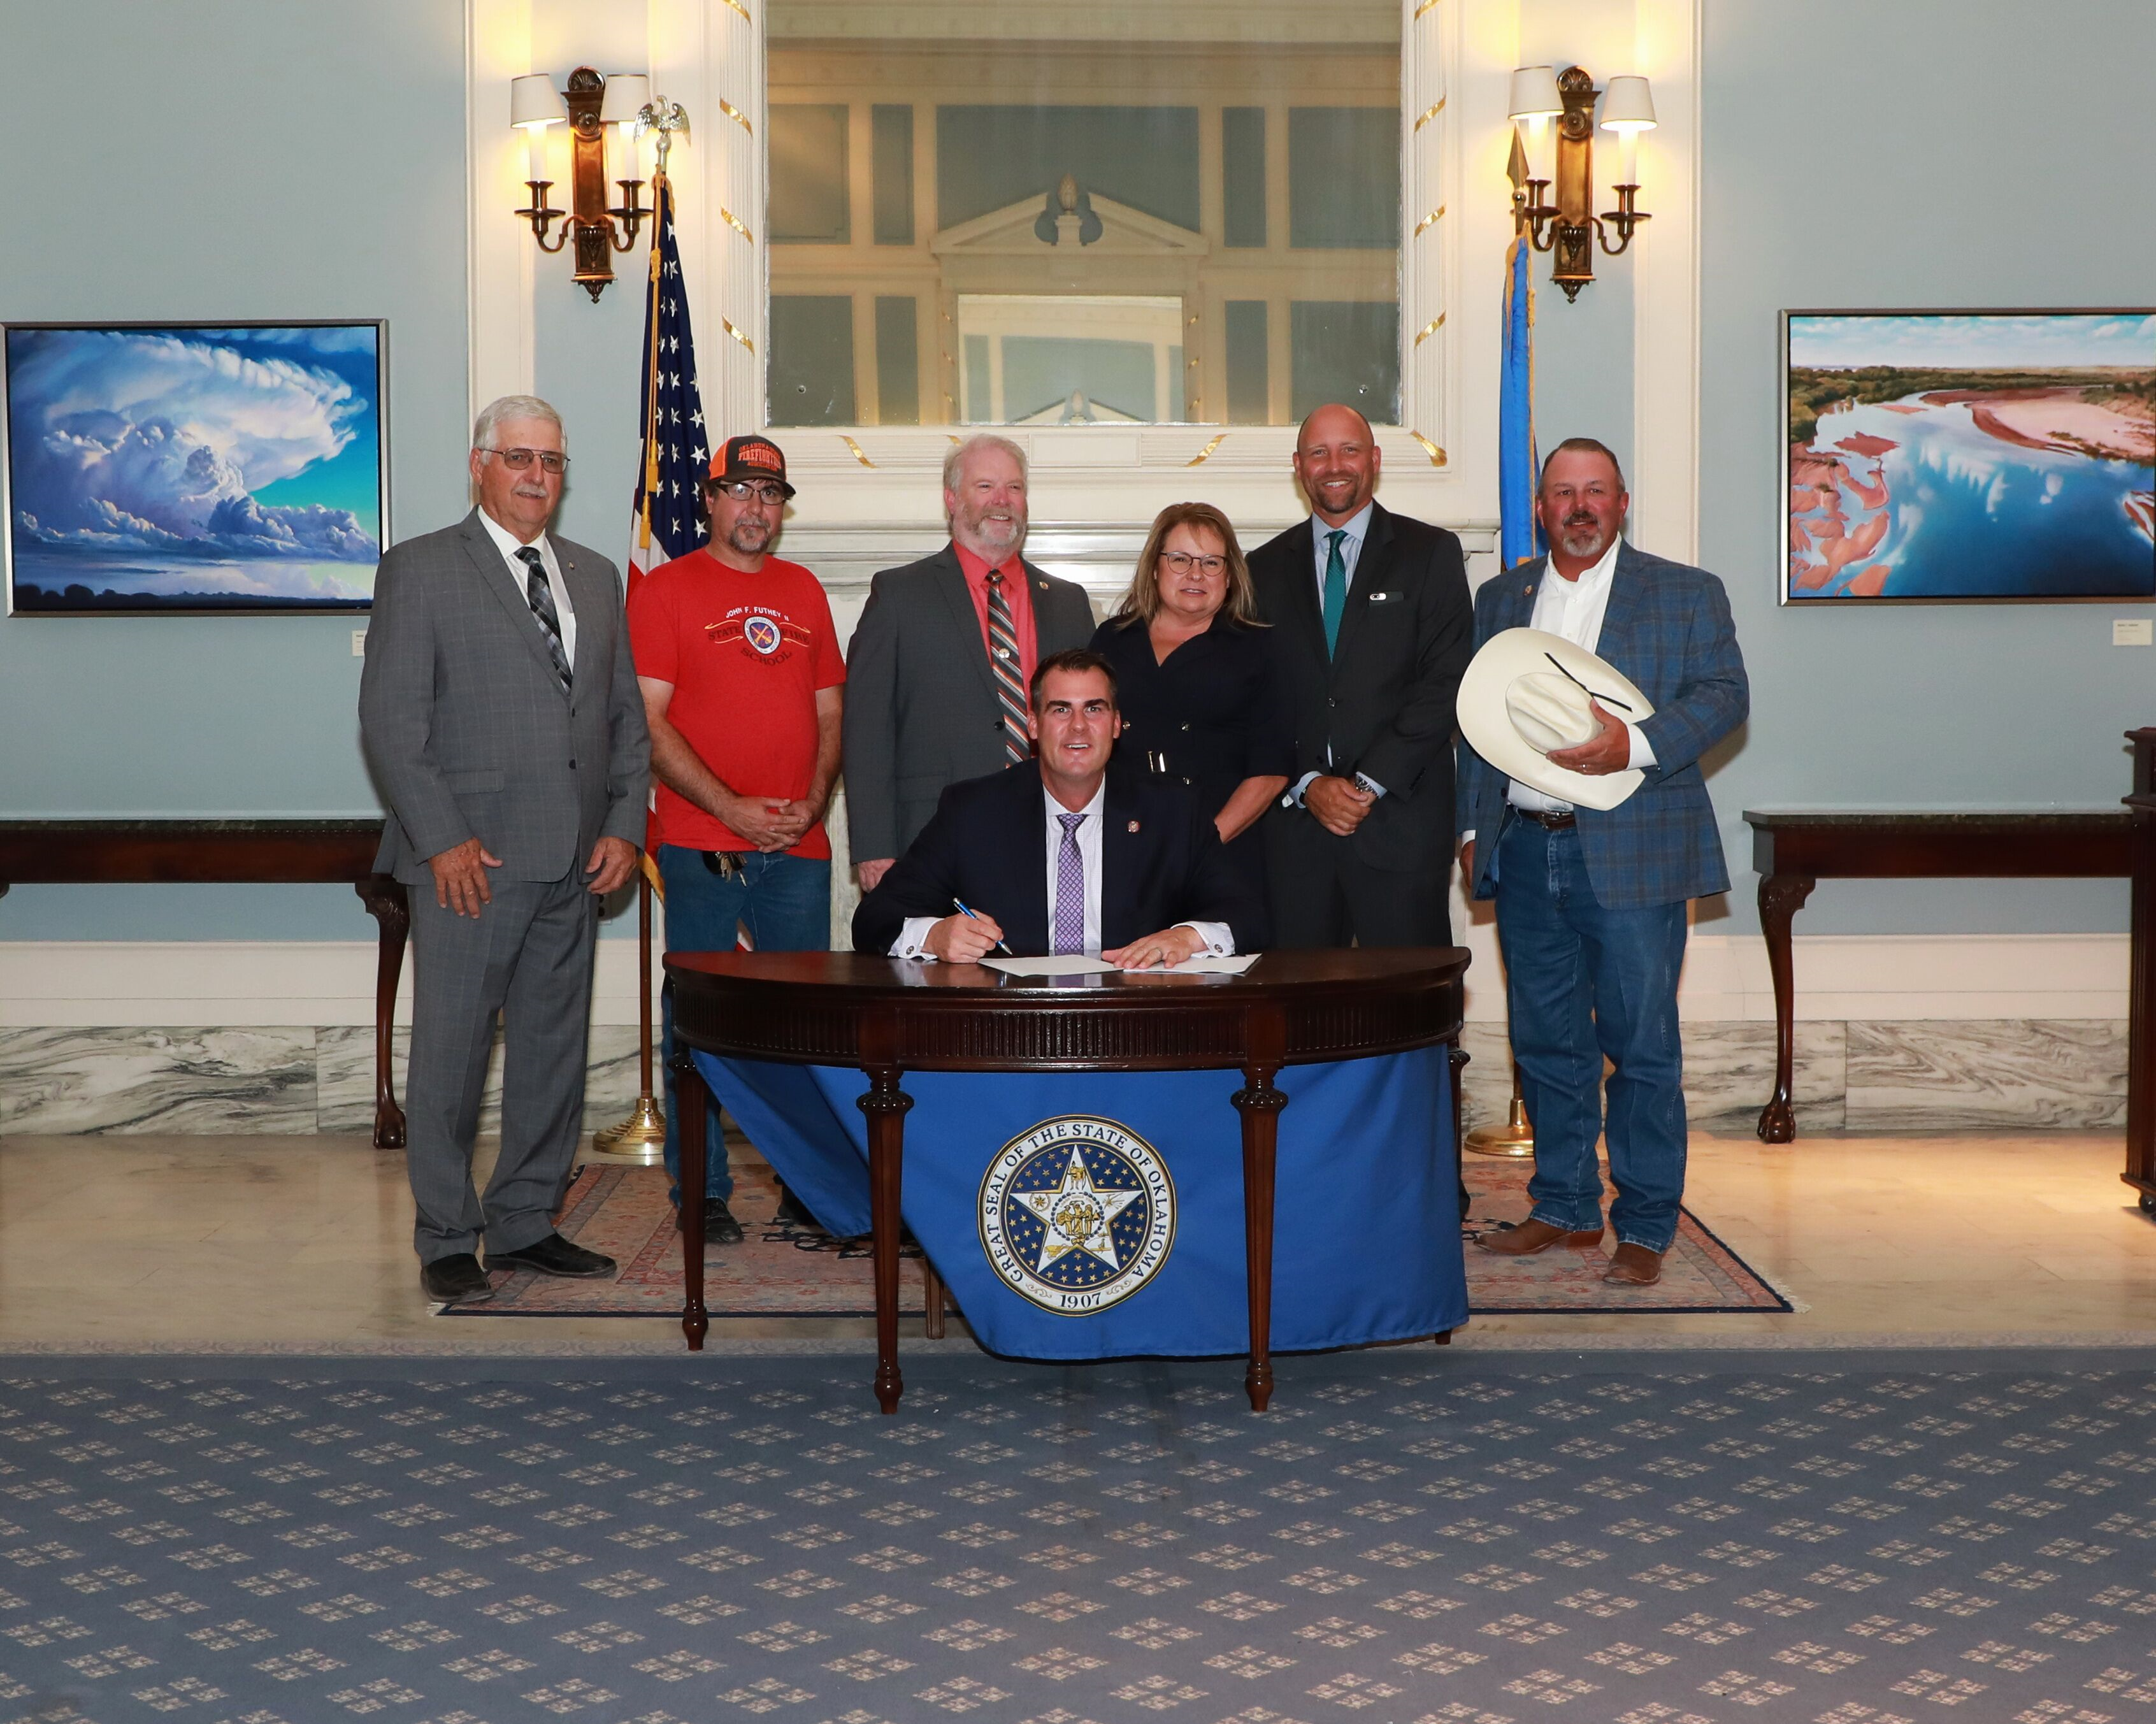 A ceremonial bill signing was recently held at the Capitol for SB 164, assisting rural fire districts.  Pictured from left to right are Sen. Roland Pederson, Tim Bartram, Special Projects Coordinator for the Oklahoma State Firefighters Association (OSFA), Steve Lumry, Executive Director, Sheri Nickel, Administrative Director, Rep. Gary Mize, Don Armes, lobbyist, and Gov. Kevin Stitt, seated.